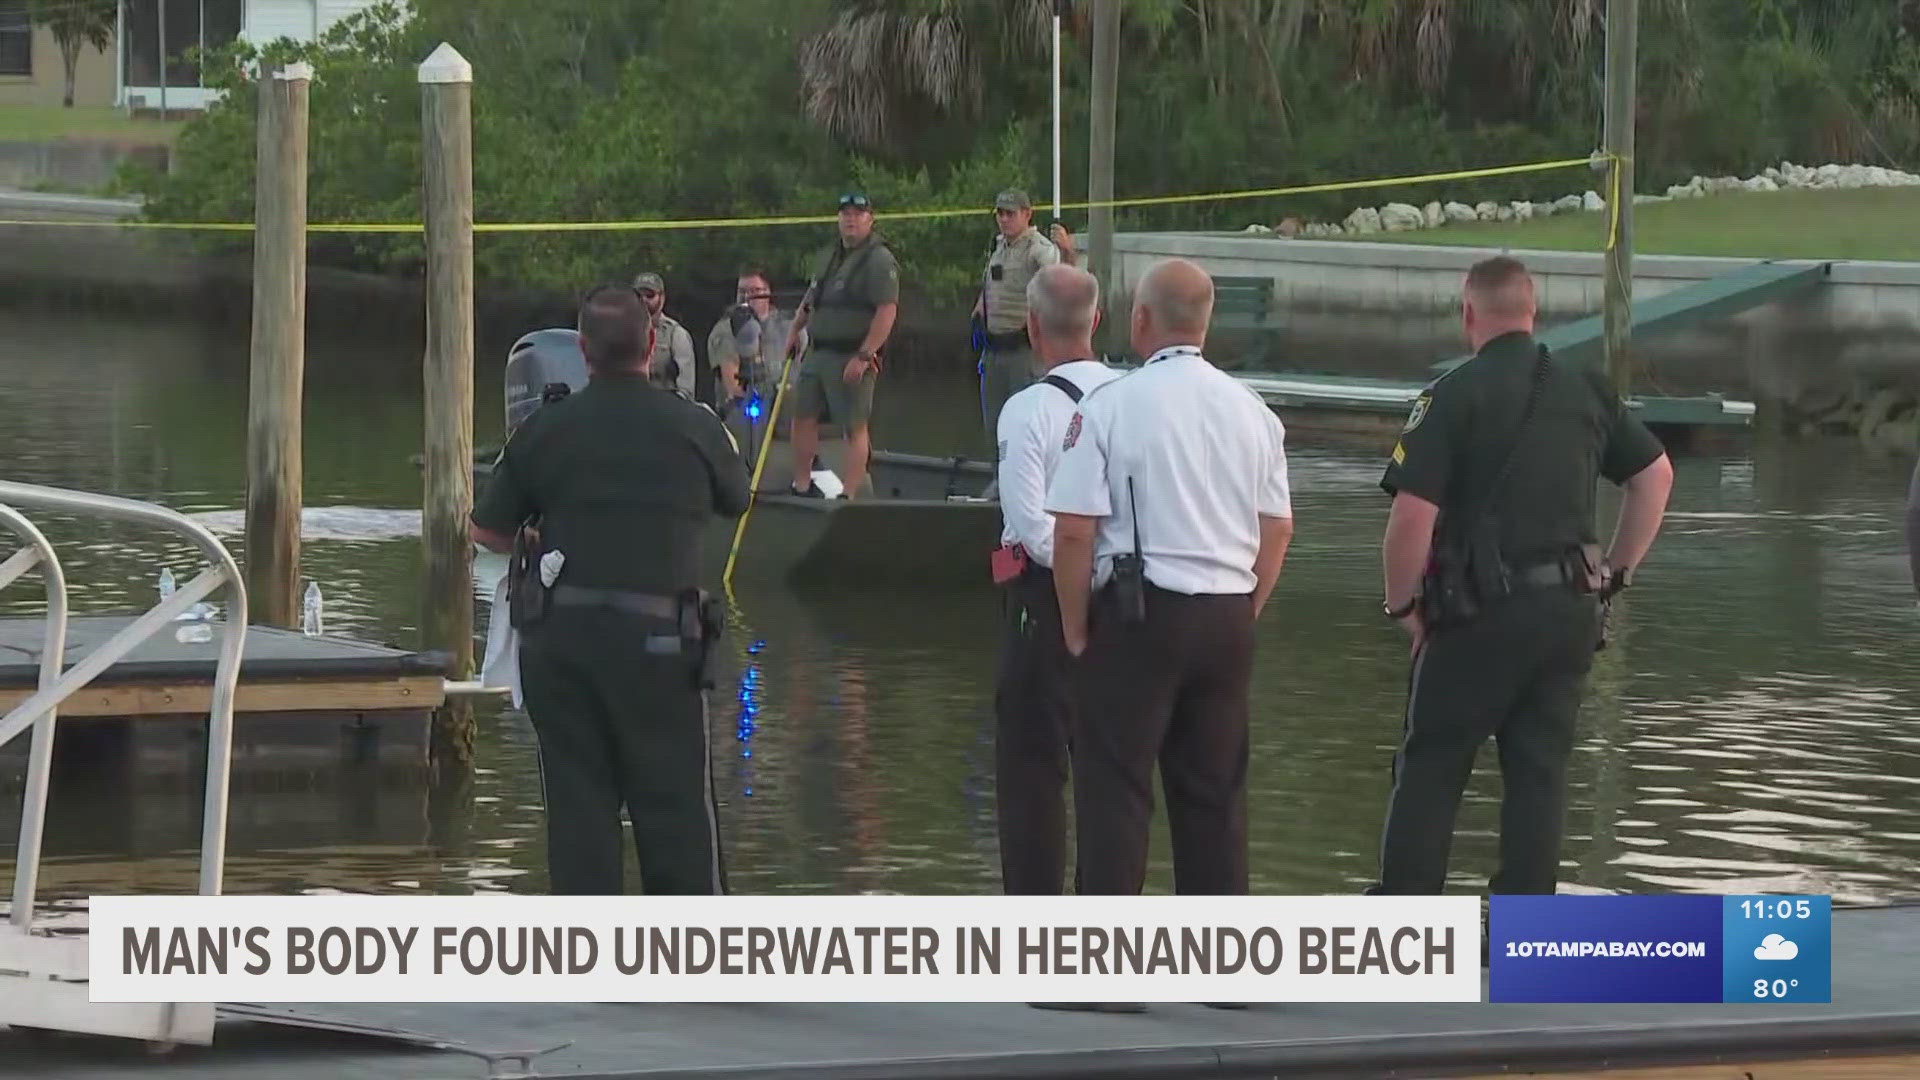 The Hernando County Sheriff's Office marine unit, dive team, patrol deputies and fire rescue responded to the scene.